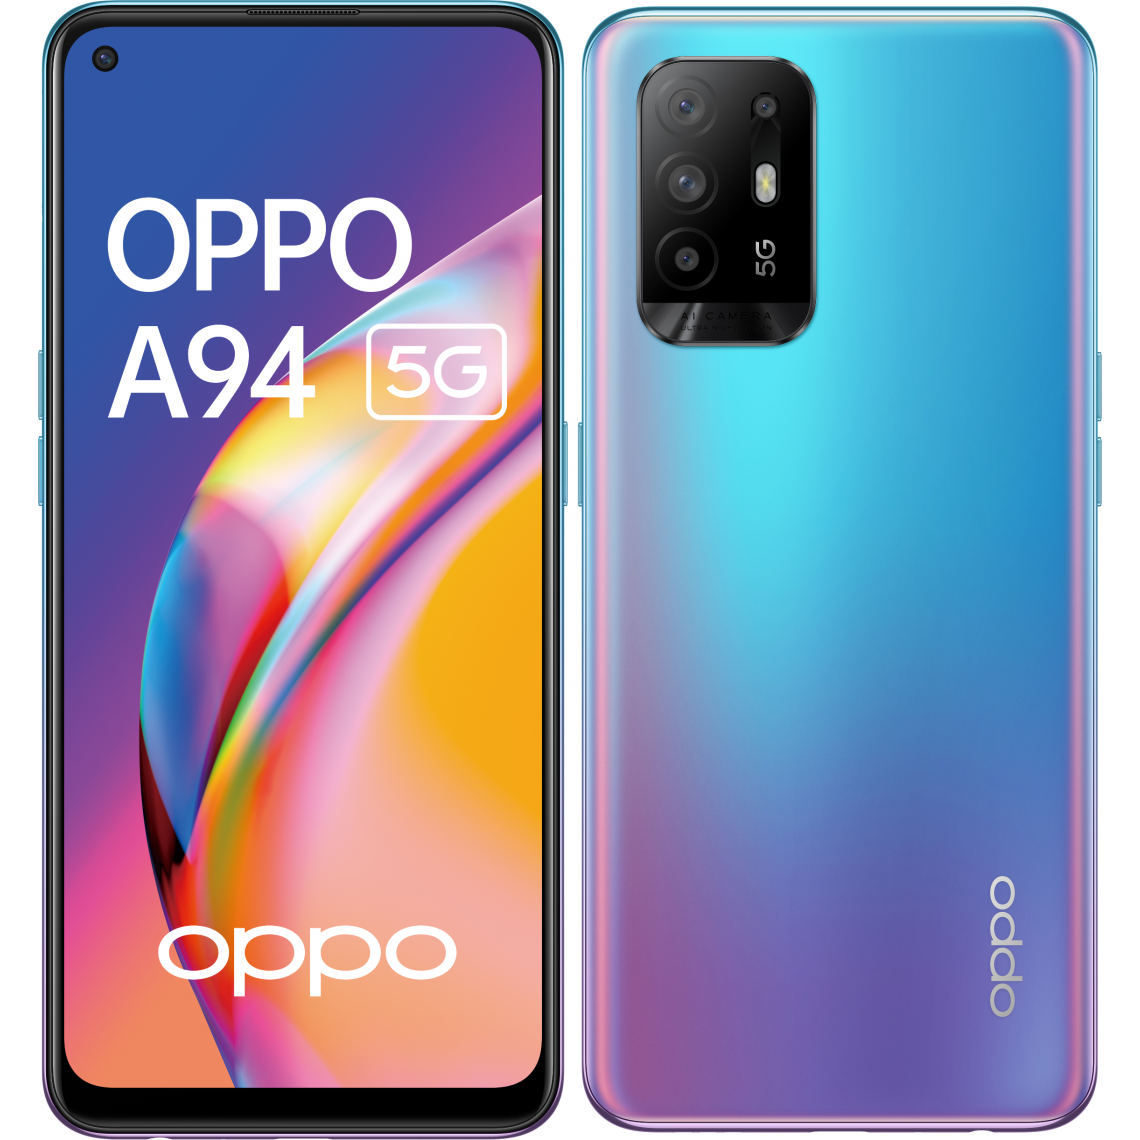 Oppo - A94 - 128 Go - 5G - Bleu - Smartphone Android